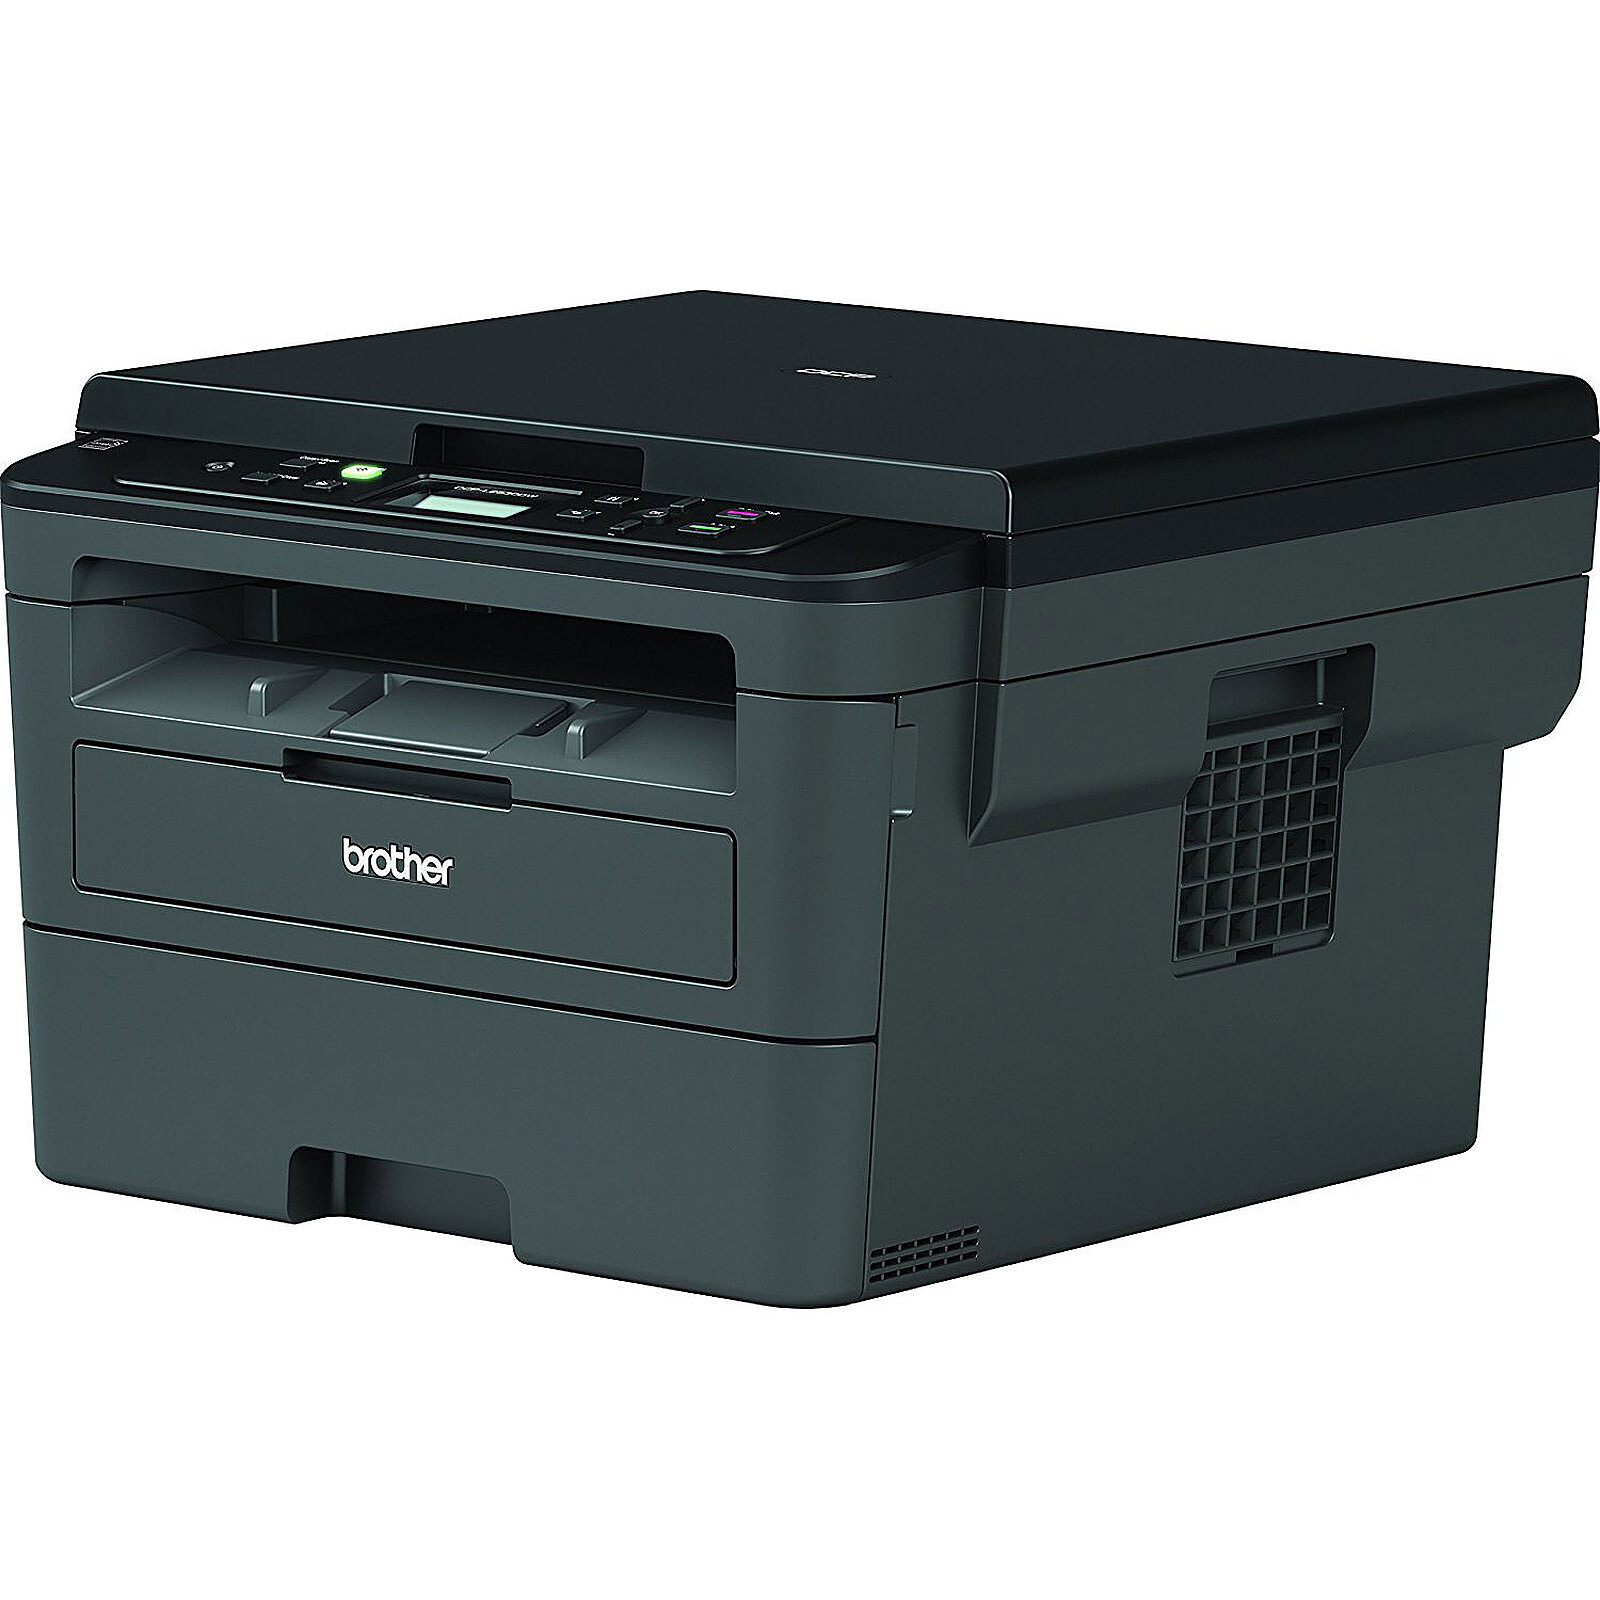 Brother DCP-L2530DW - All-in-one printer - LDLC 3-year warranty